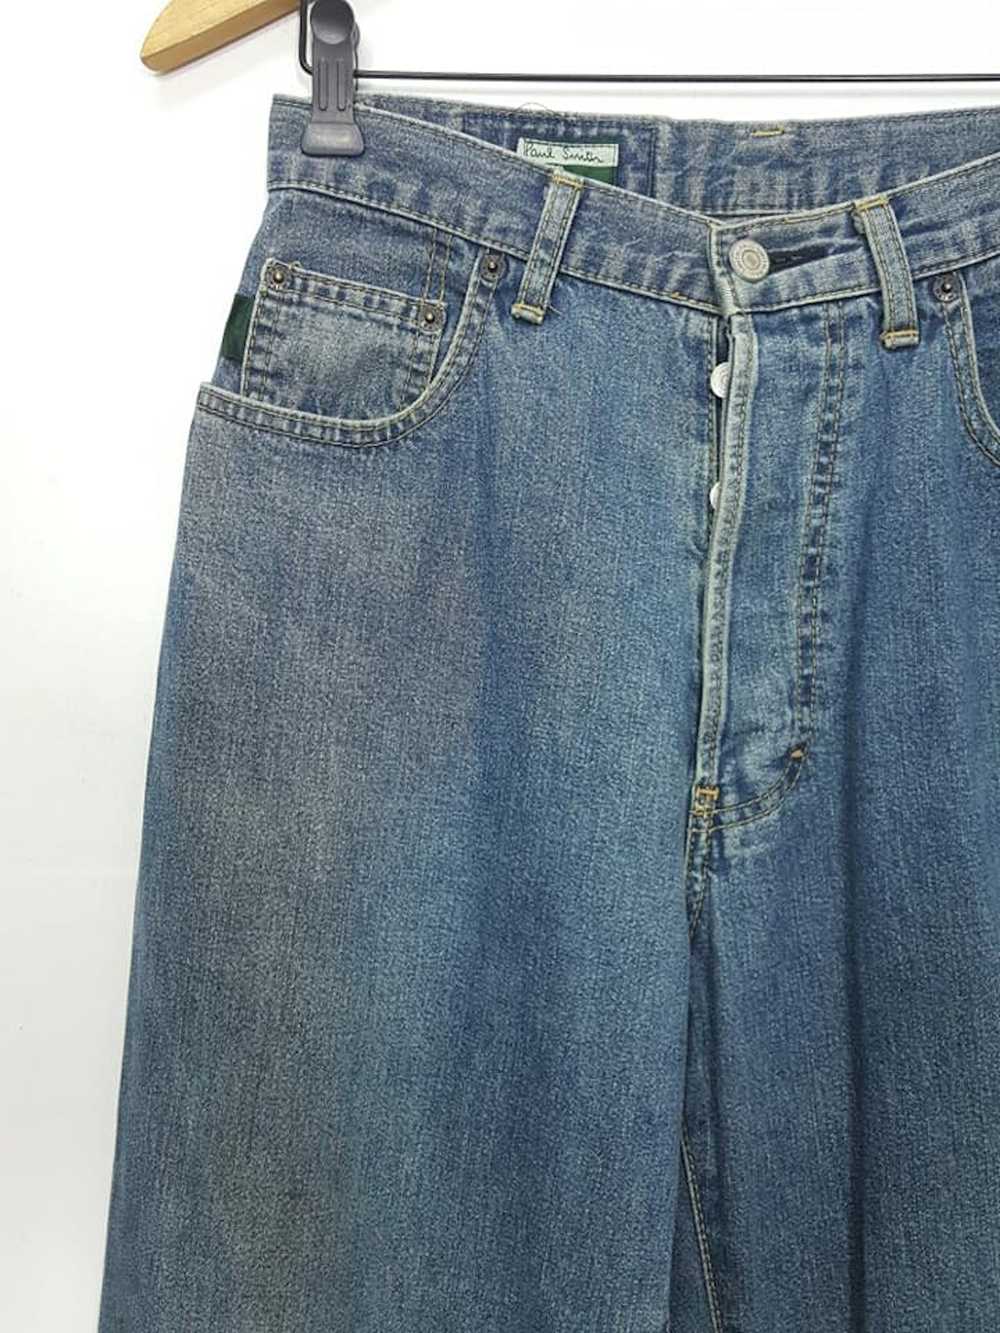 Paul Smith Paul Smith Button Fly Jeans MADE IN JA… - image 3